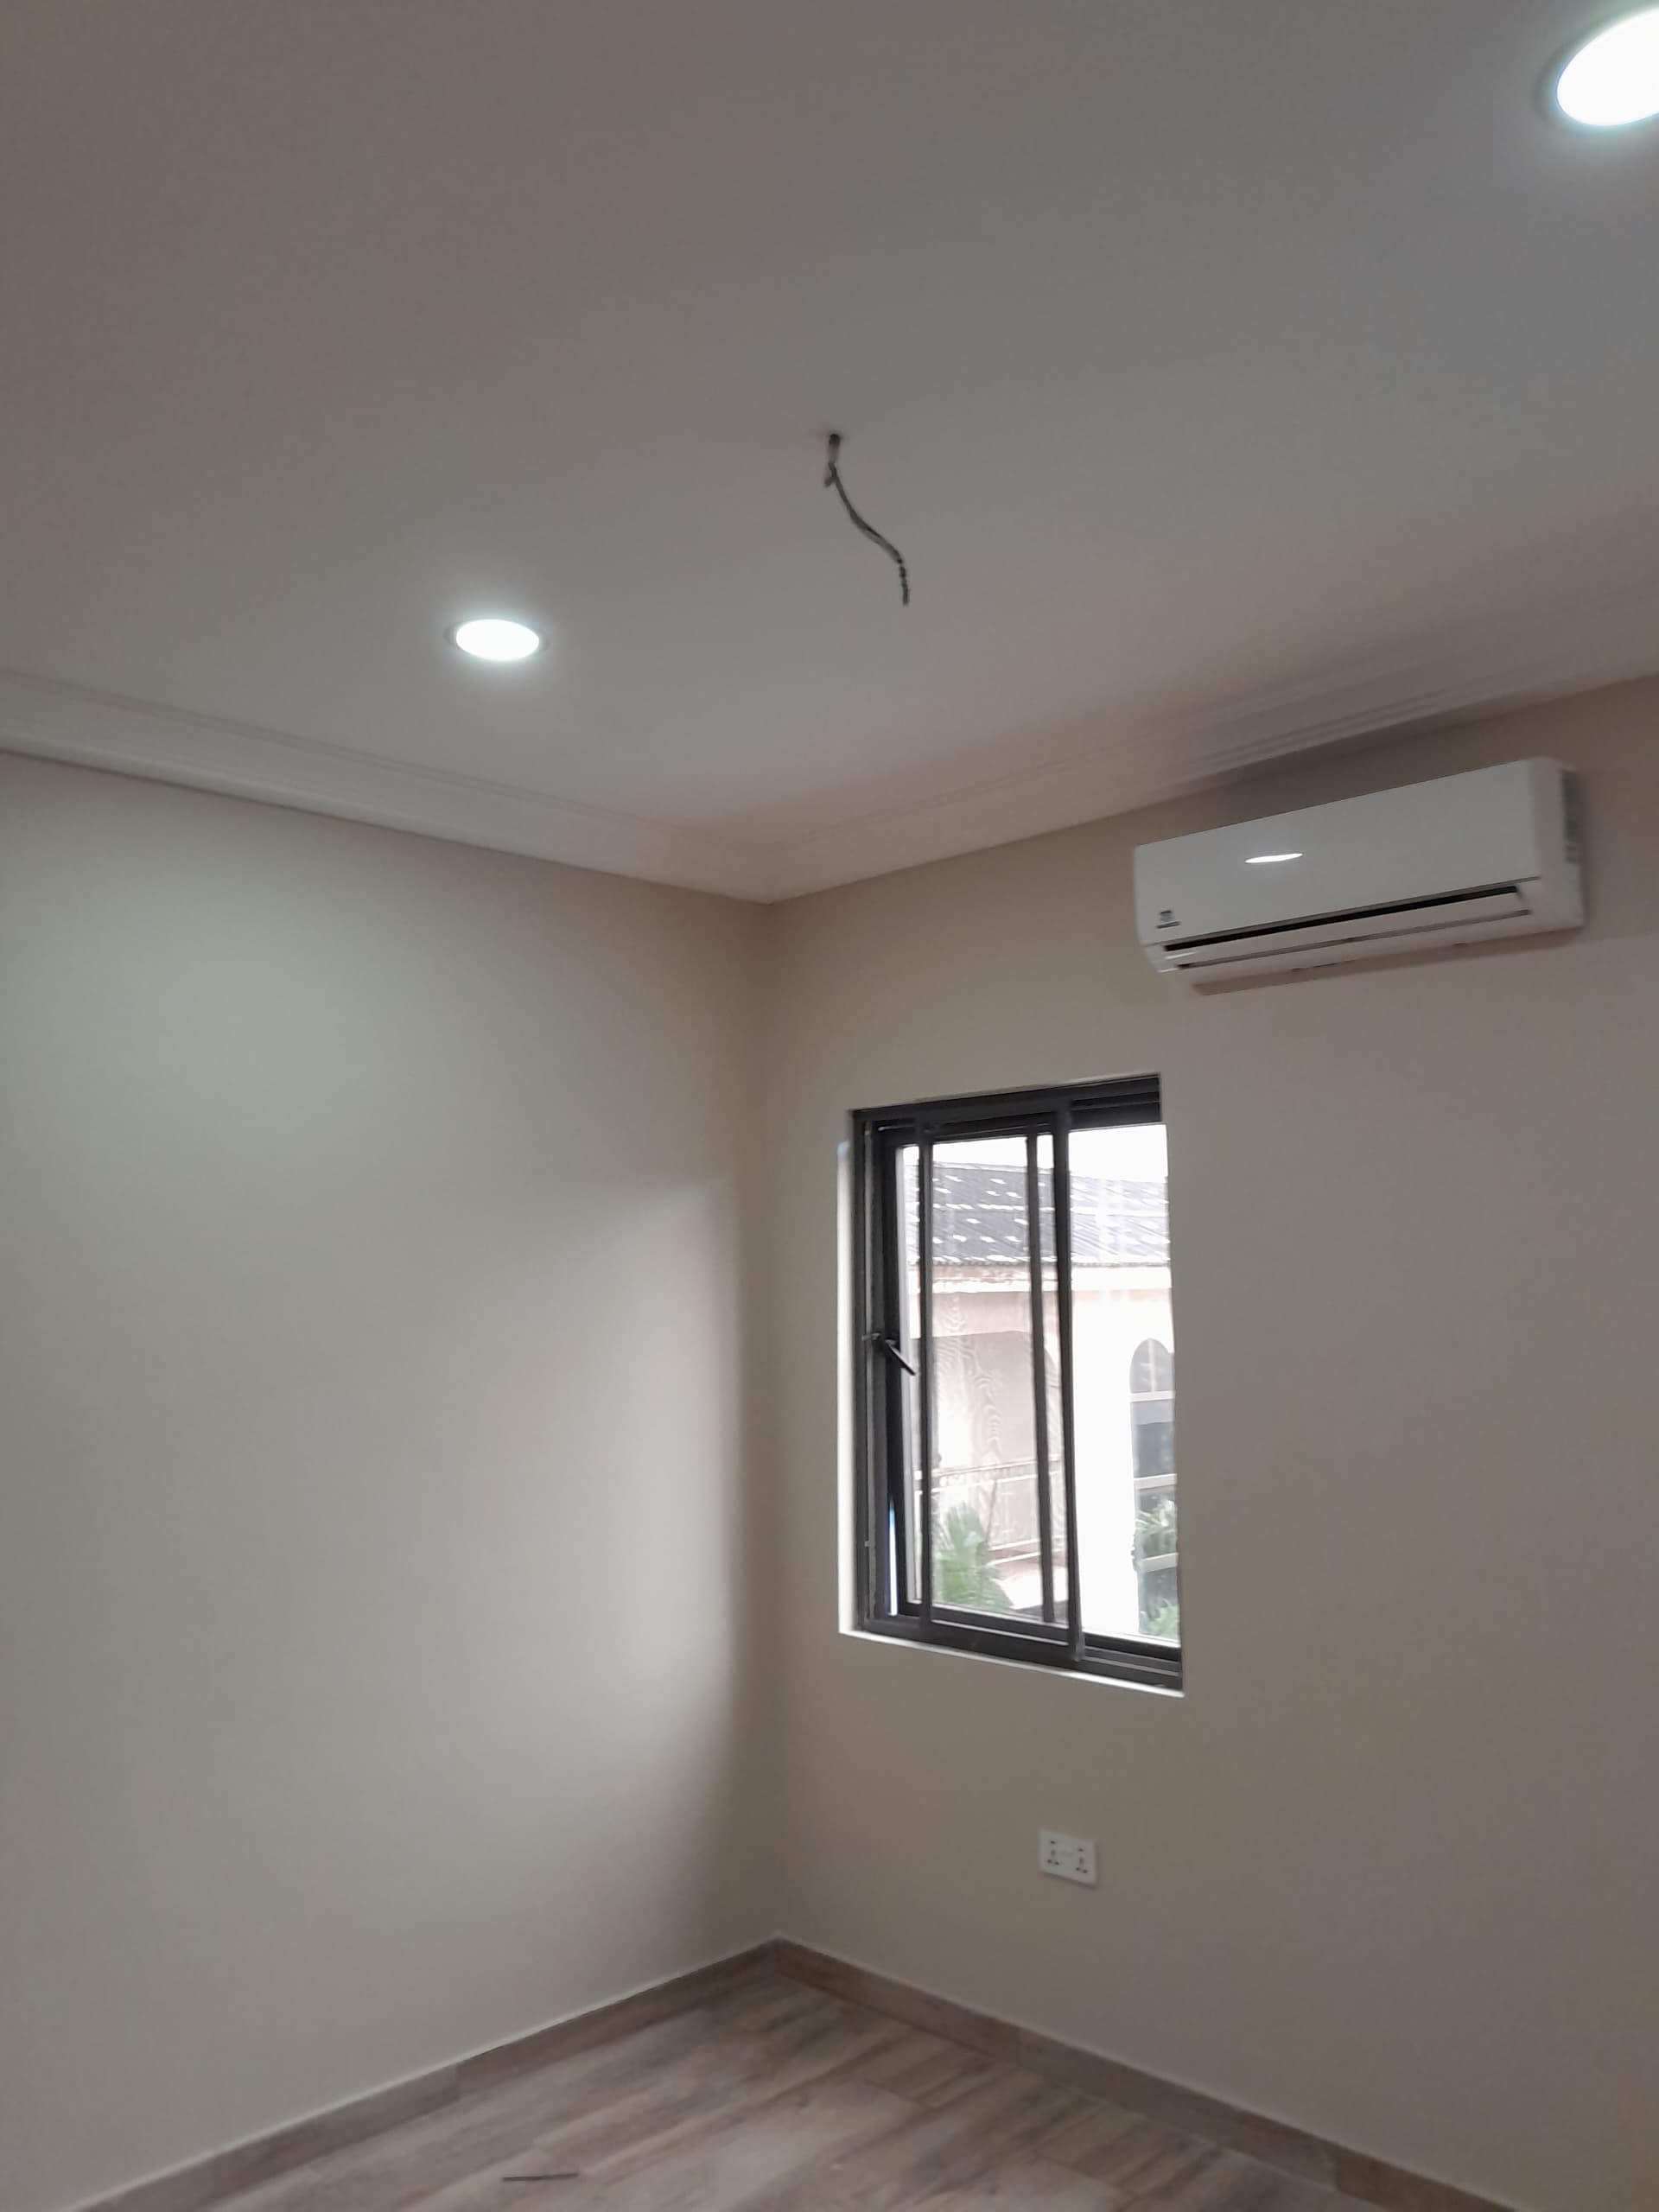 Three (3) Bedroom Detached House for Rent at Ajiringanor